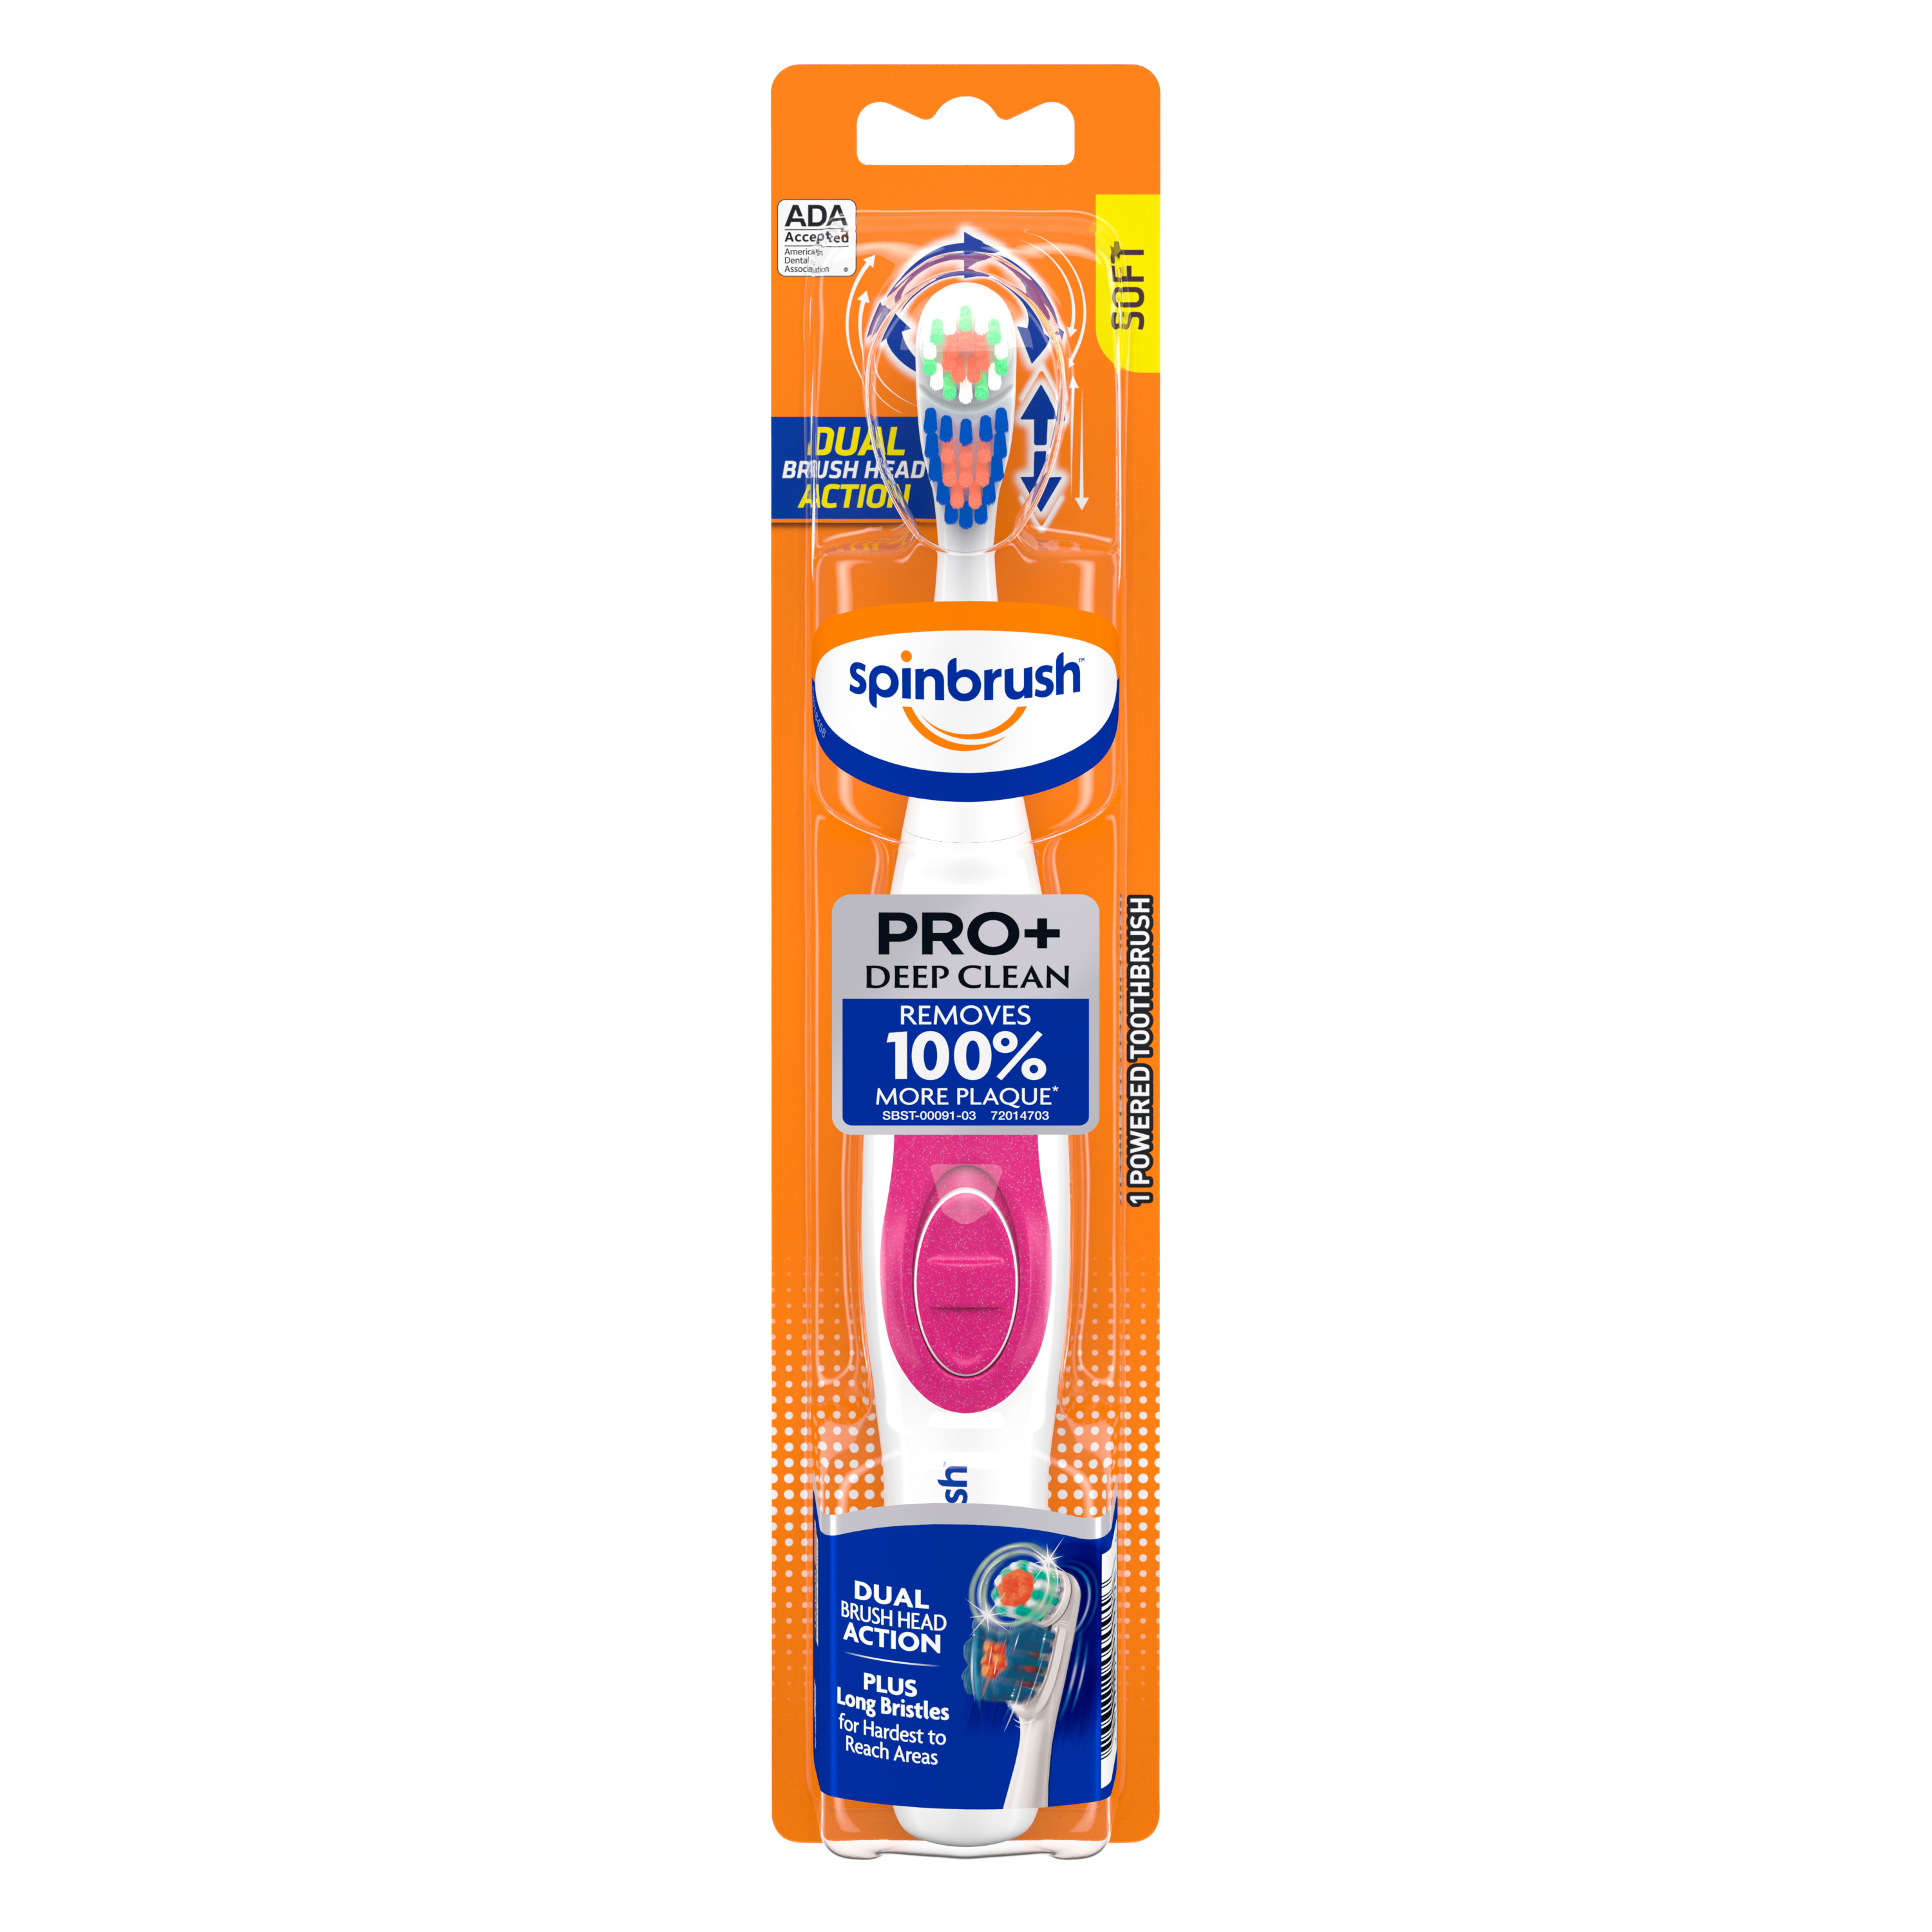 ARM & HAMMER Spinbrush PRO+ Deep Clean Battery-Operated Toothbrush – Spinbrush Battery Powered Toothbrush Removes 100% More Plaque- Soft Bristles -Batteries Included - image 1 of 13